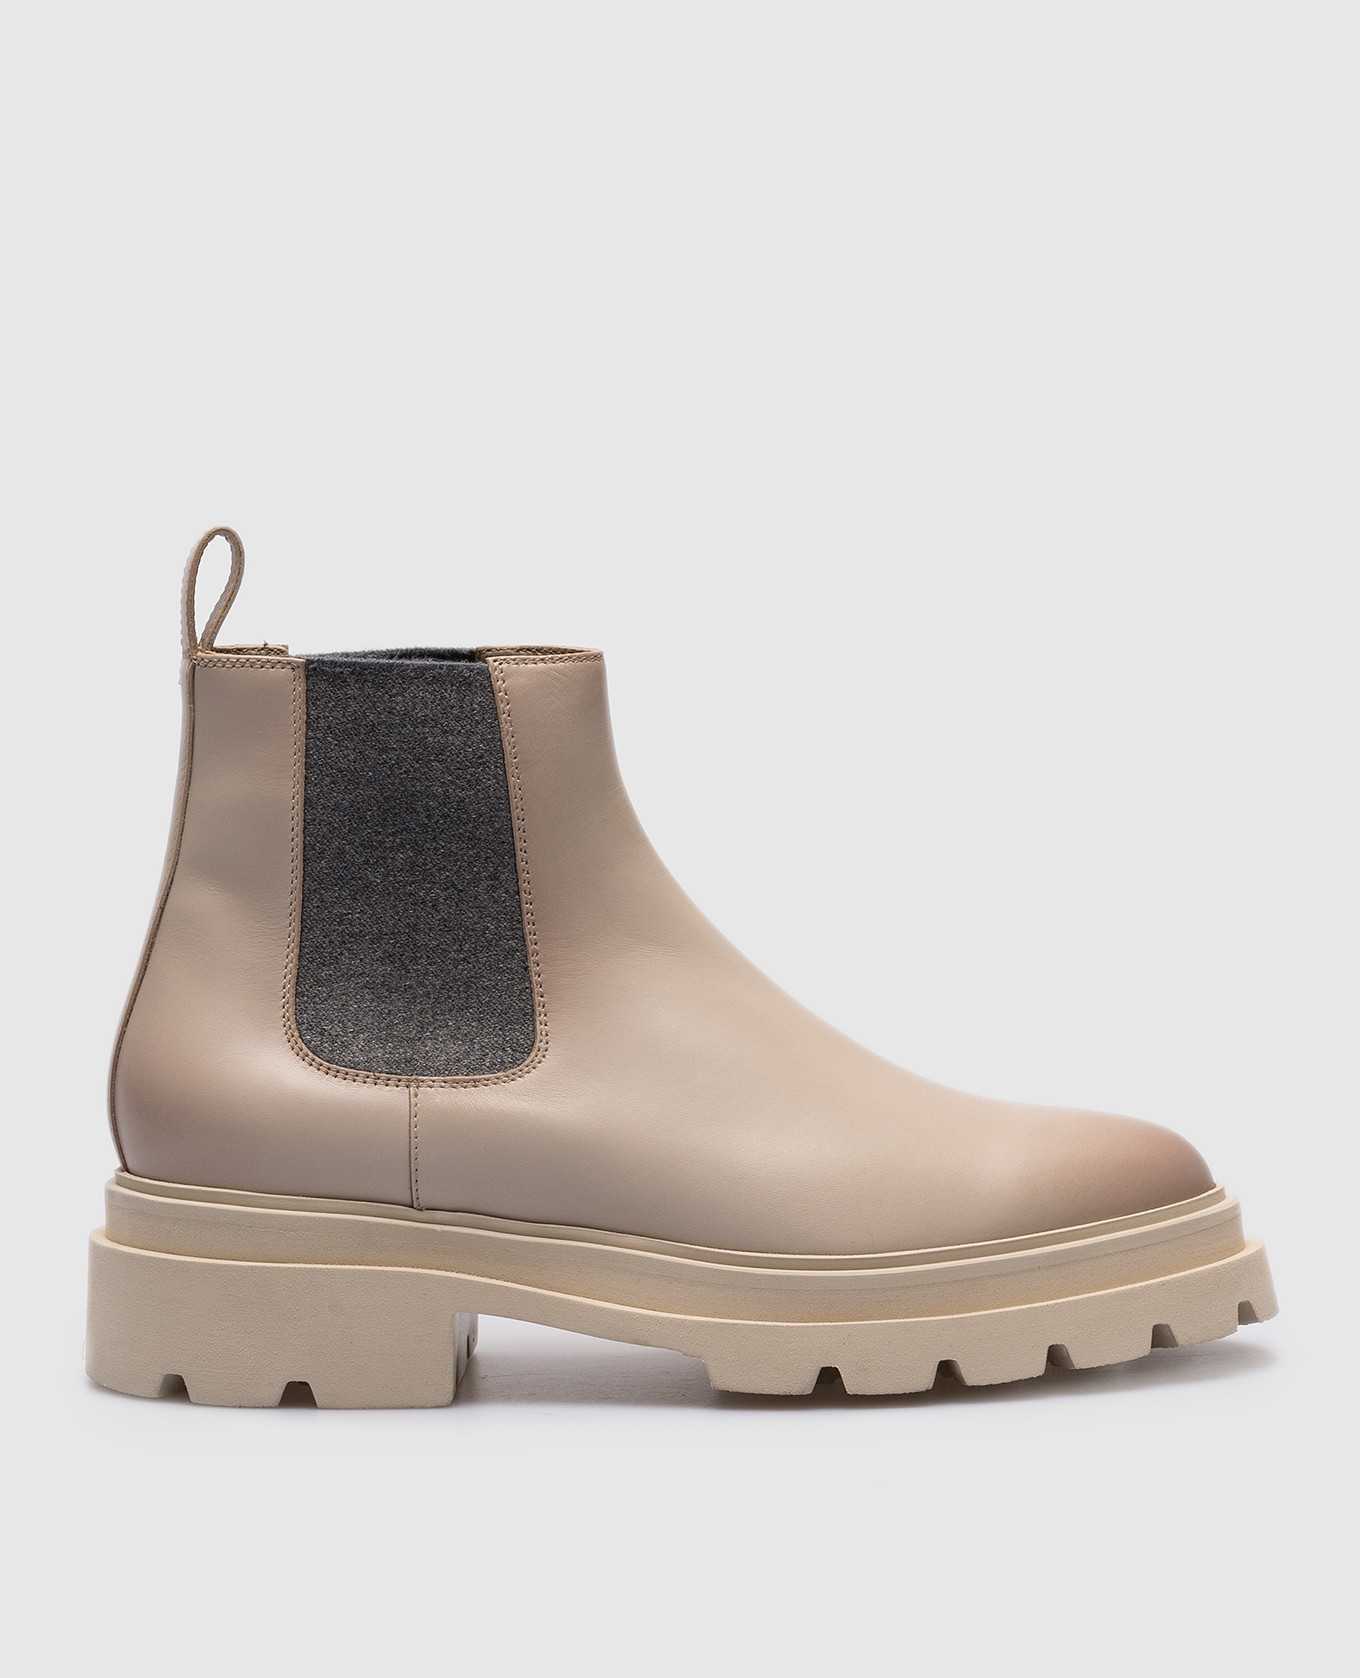 Beige leather Chelsea boots